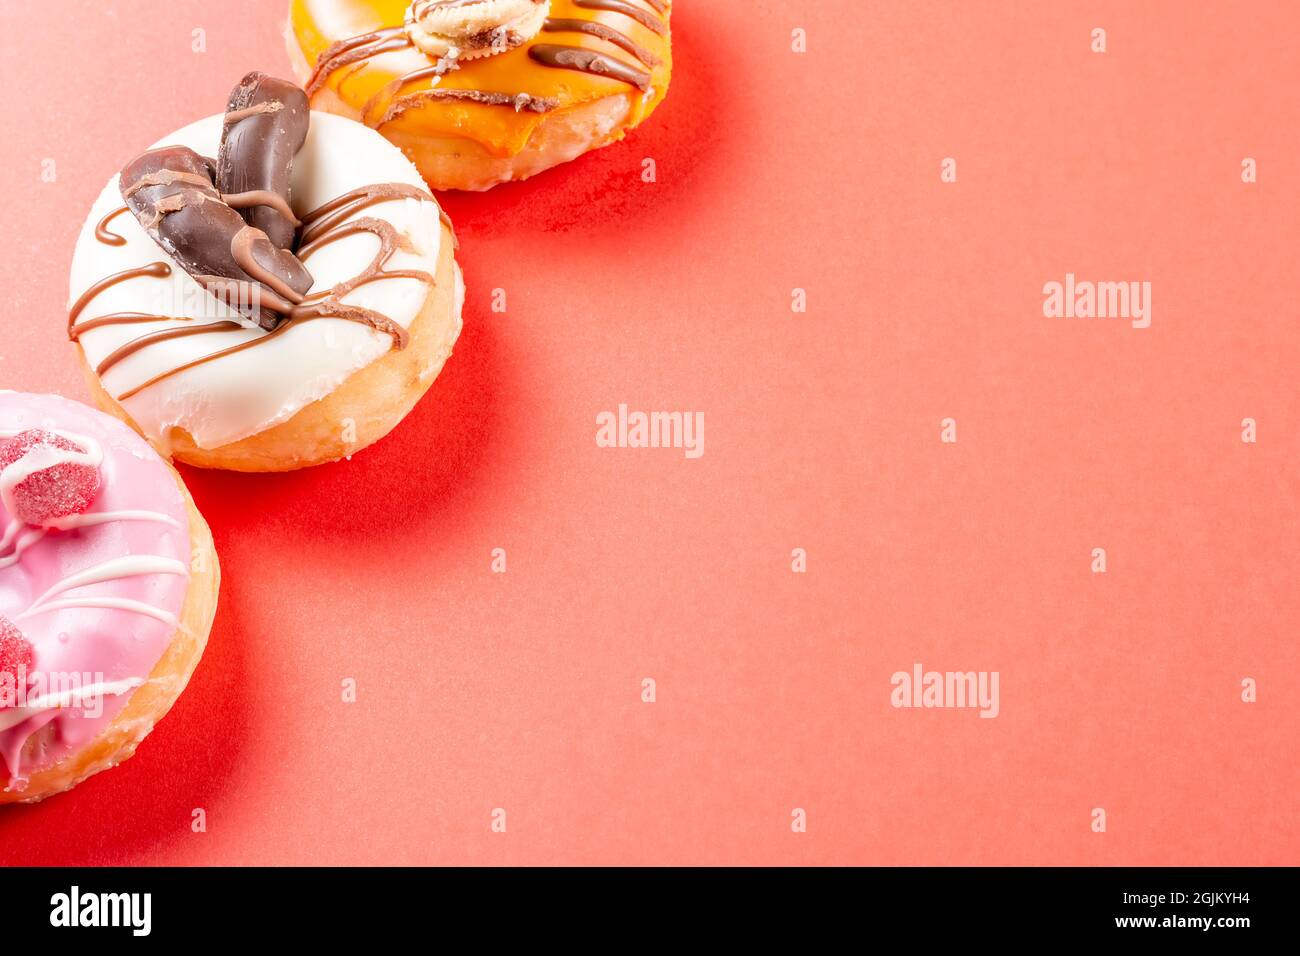 Photo of a white chocolate donuts and two half colored donuts on a red background.The photograph has copy space and is taken in horizontal format. Stock Photo